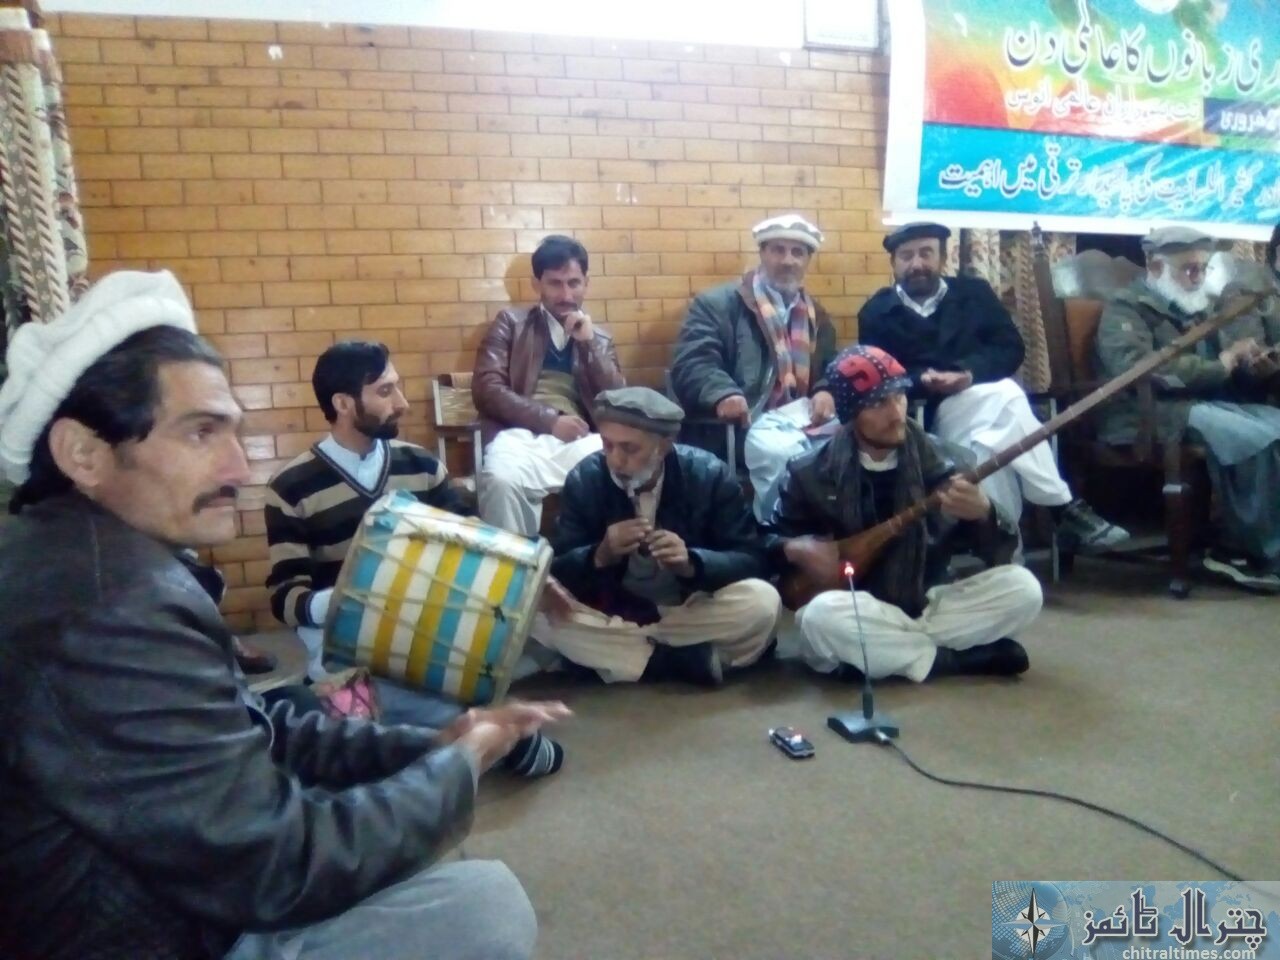 international languages day celebrated in Chitral 2